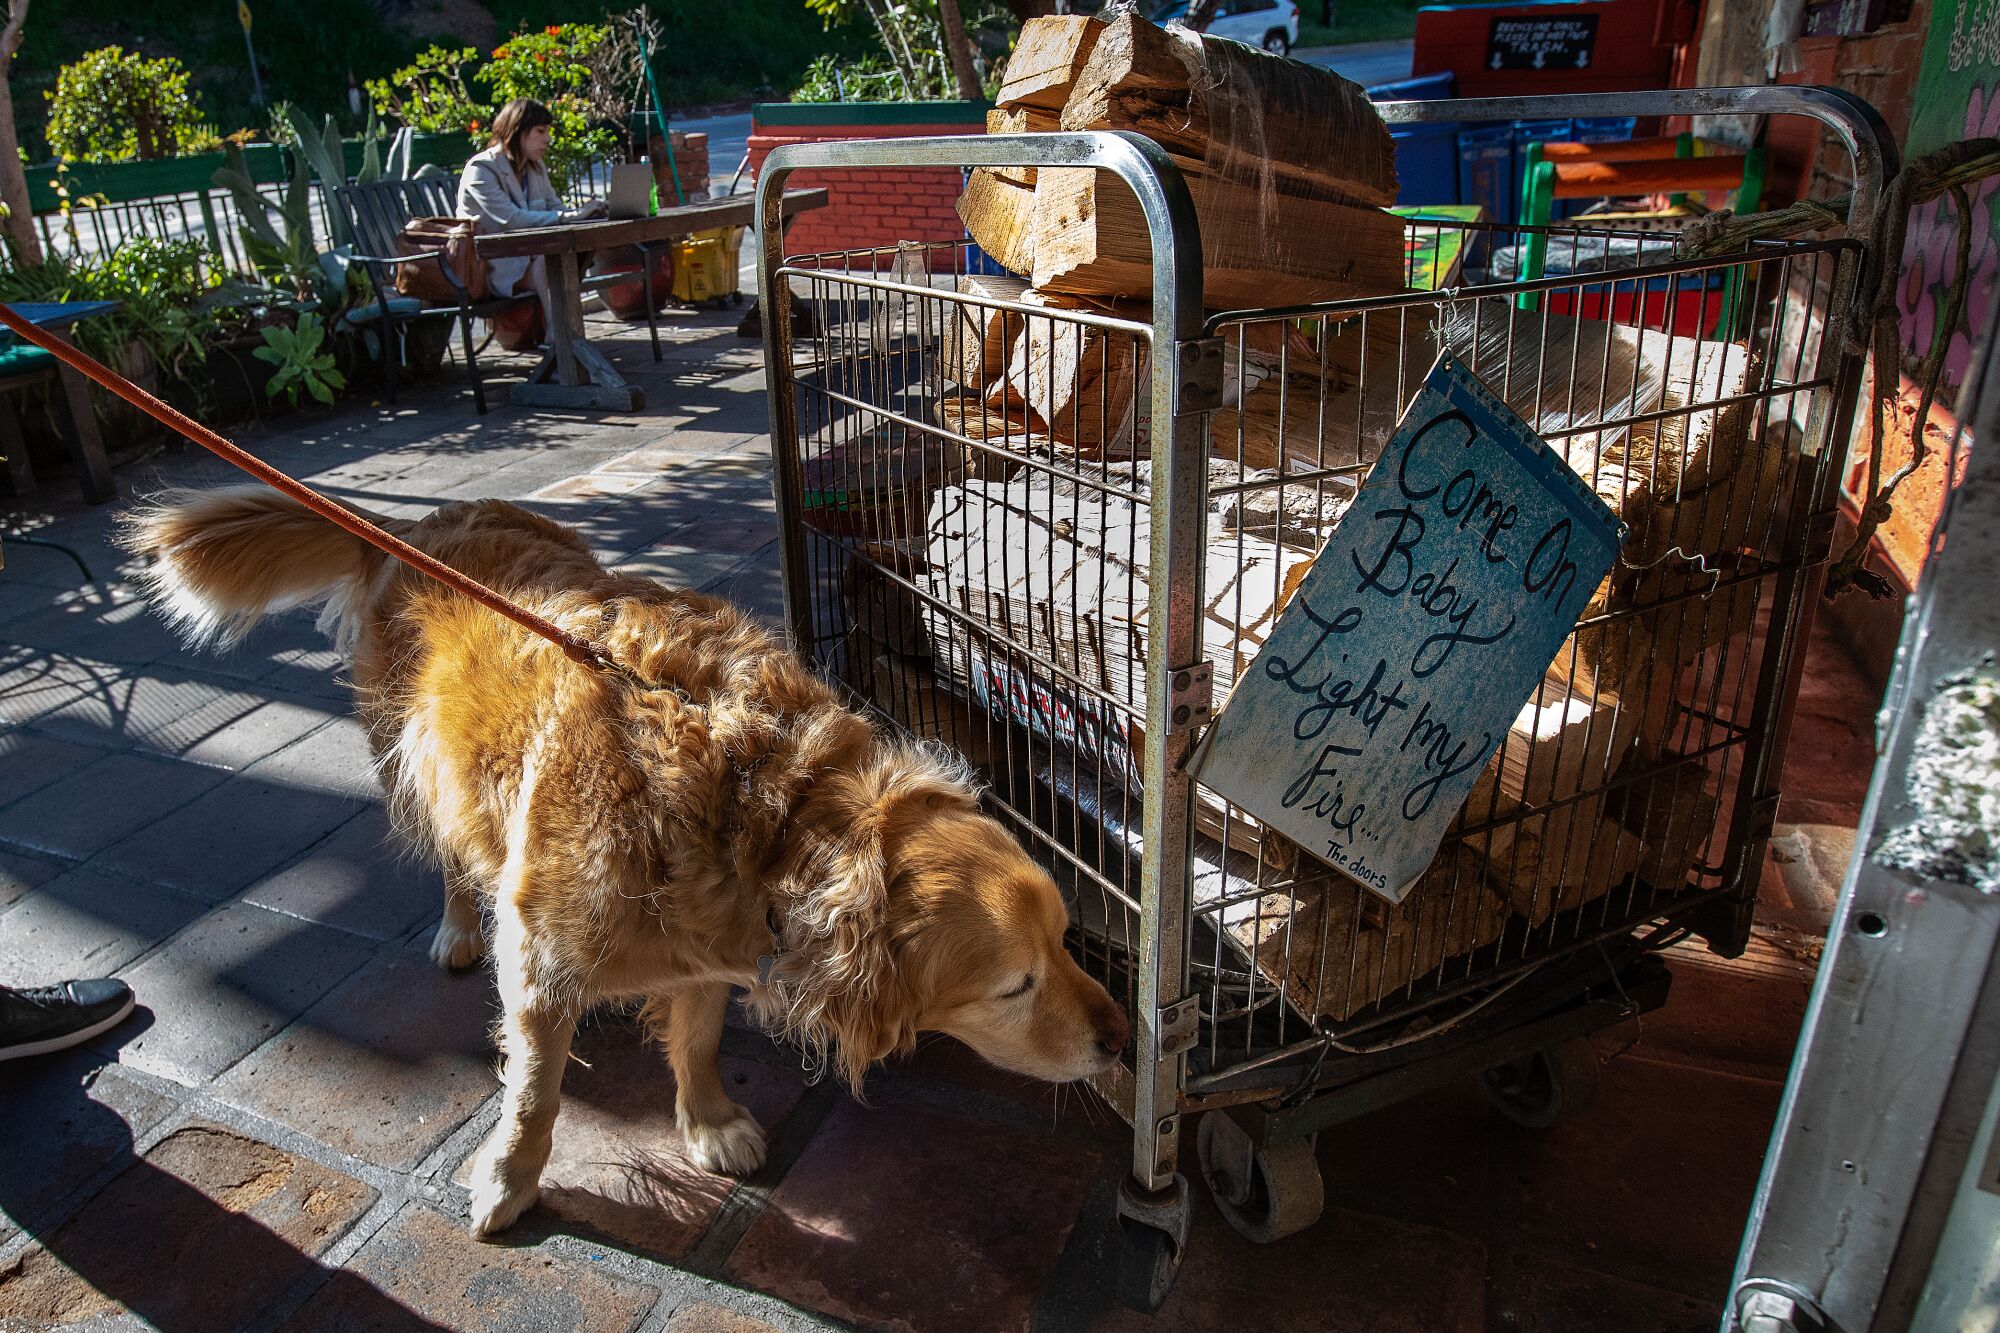 A dog on a leash sniffs at a rack of firewood for sale outside.